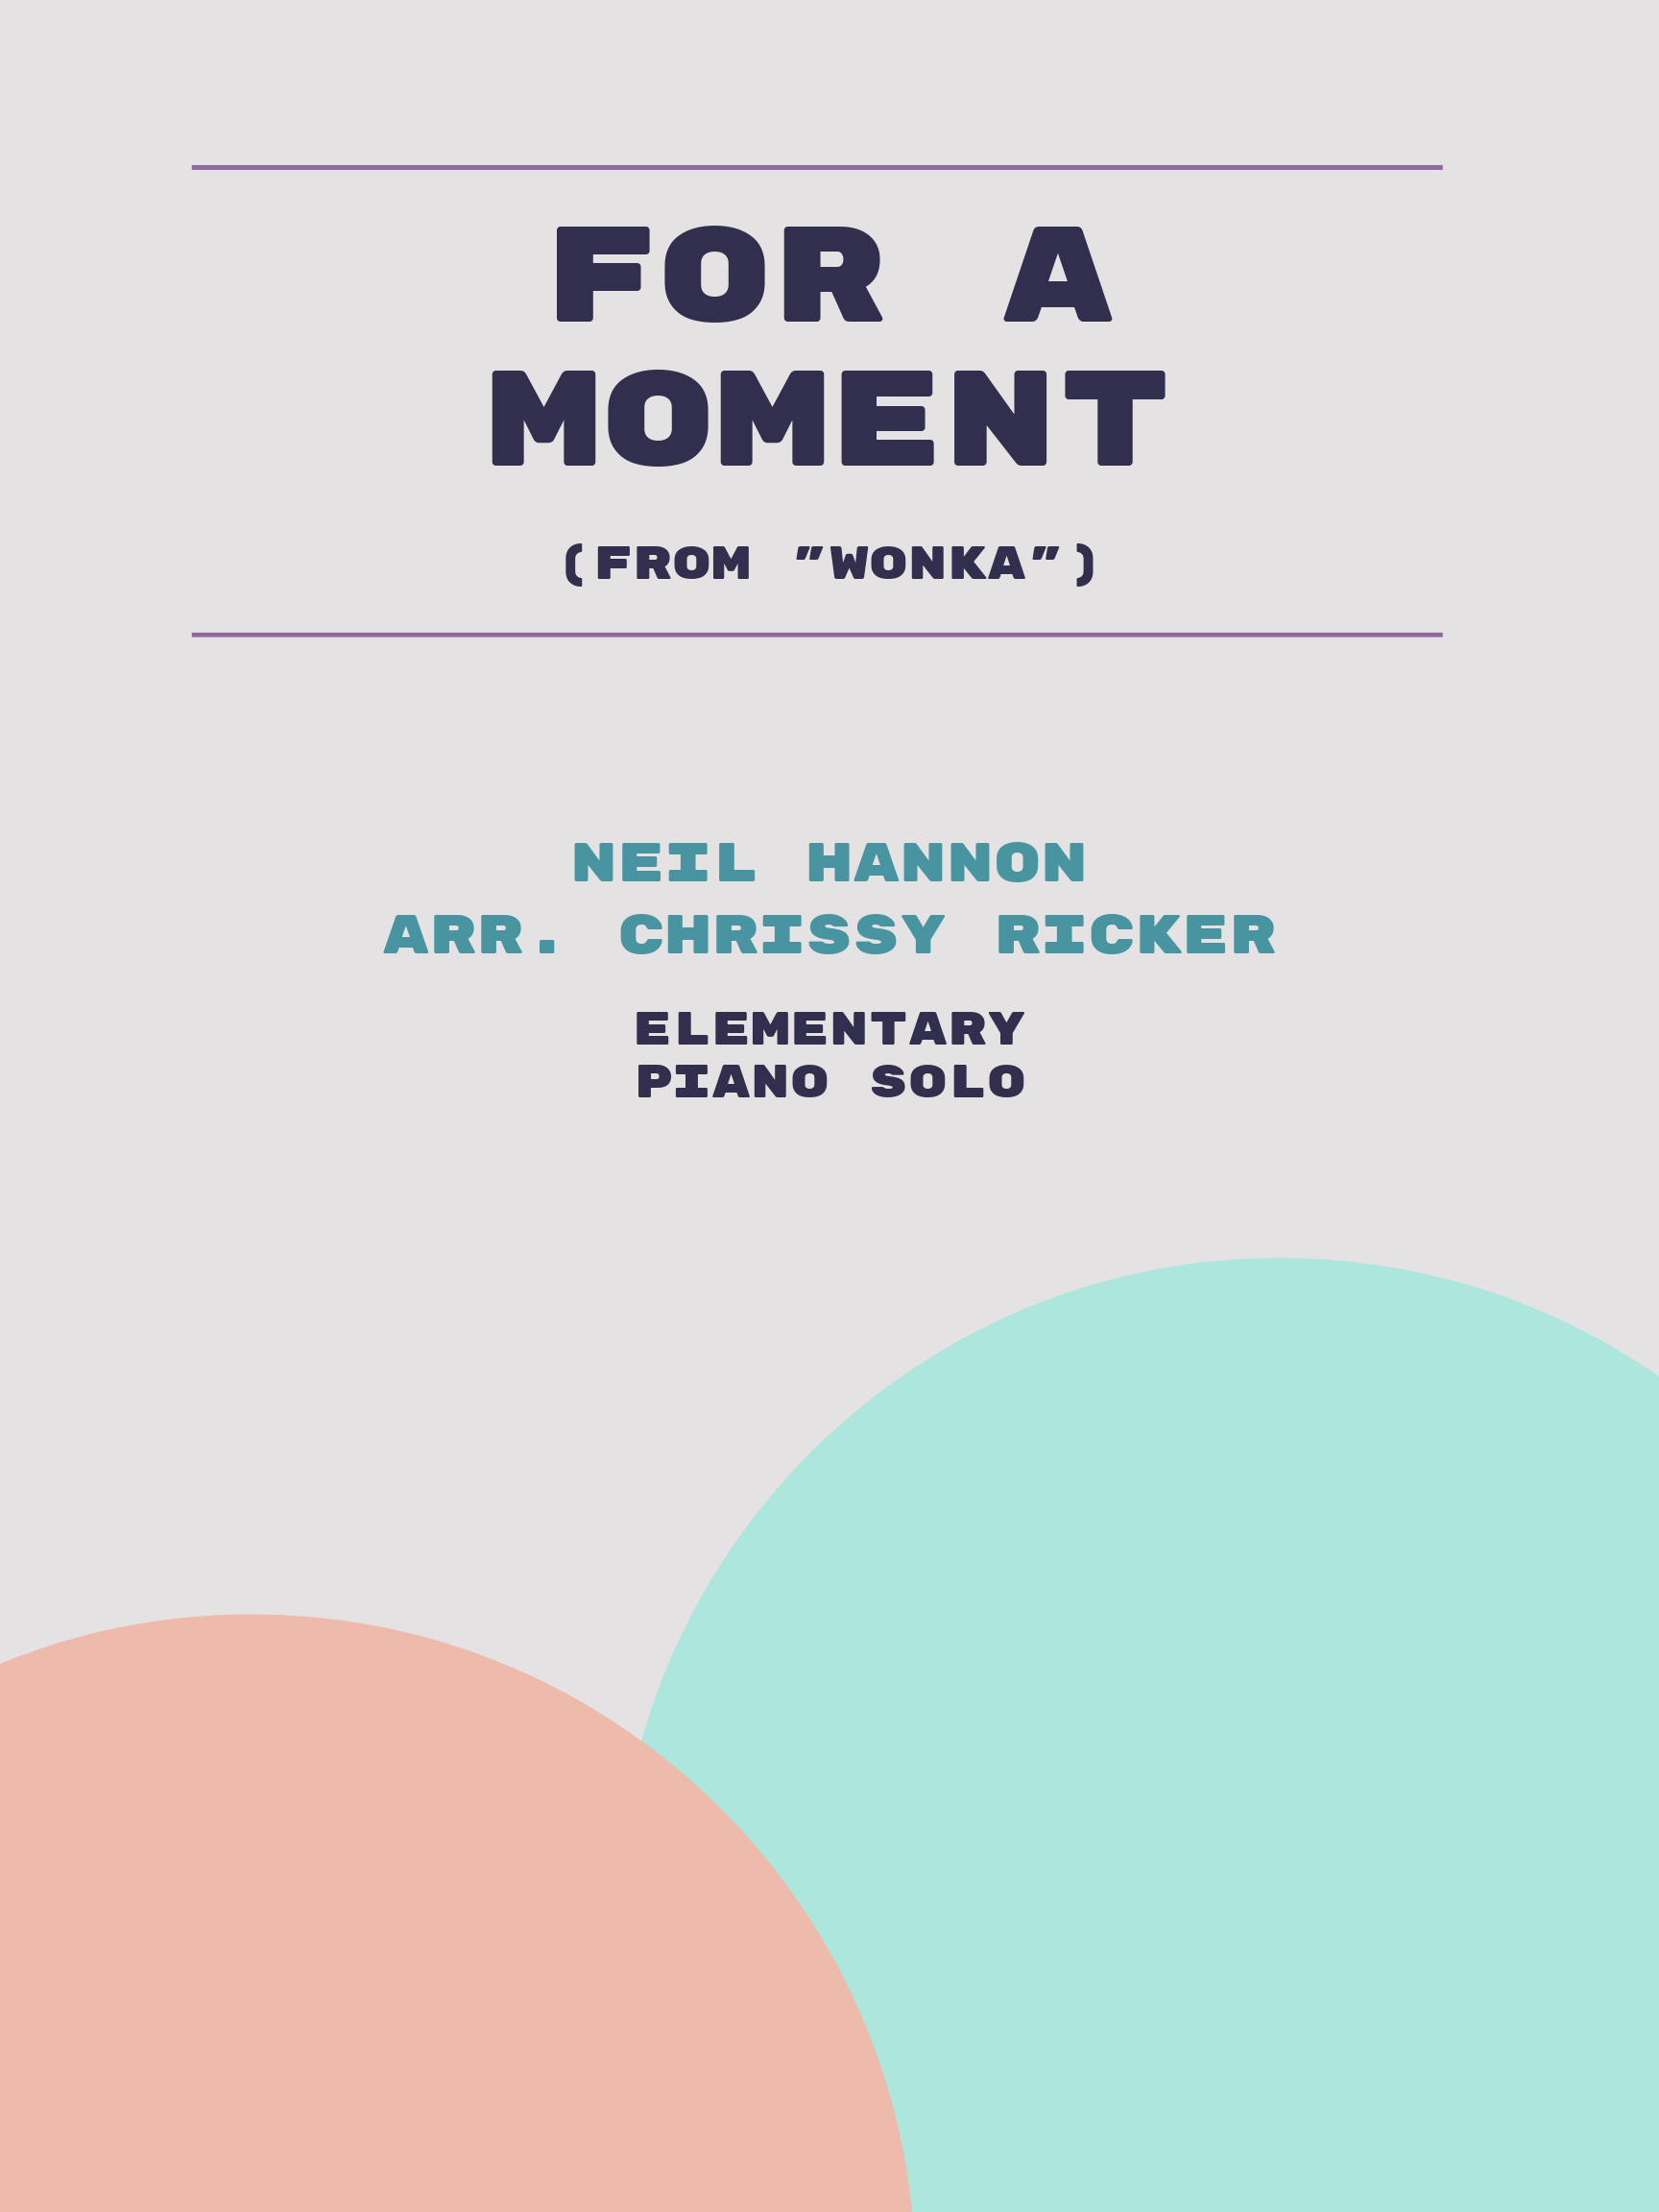 For a Moment by Neil Hannon